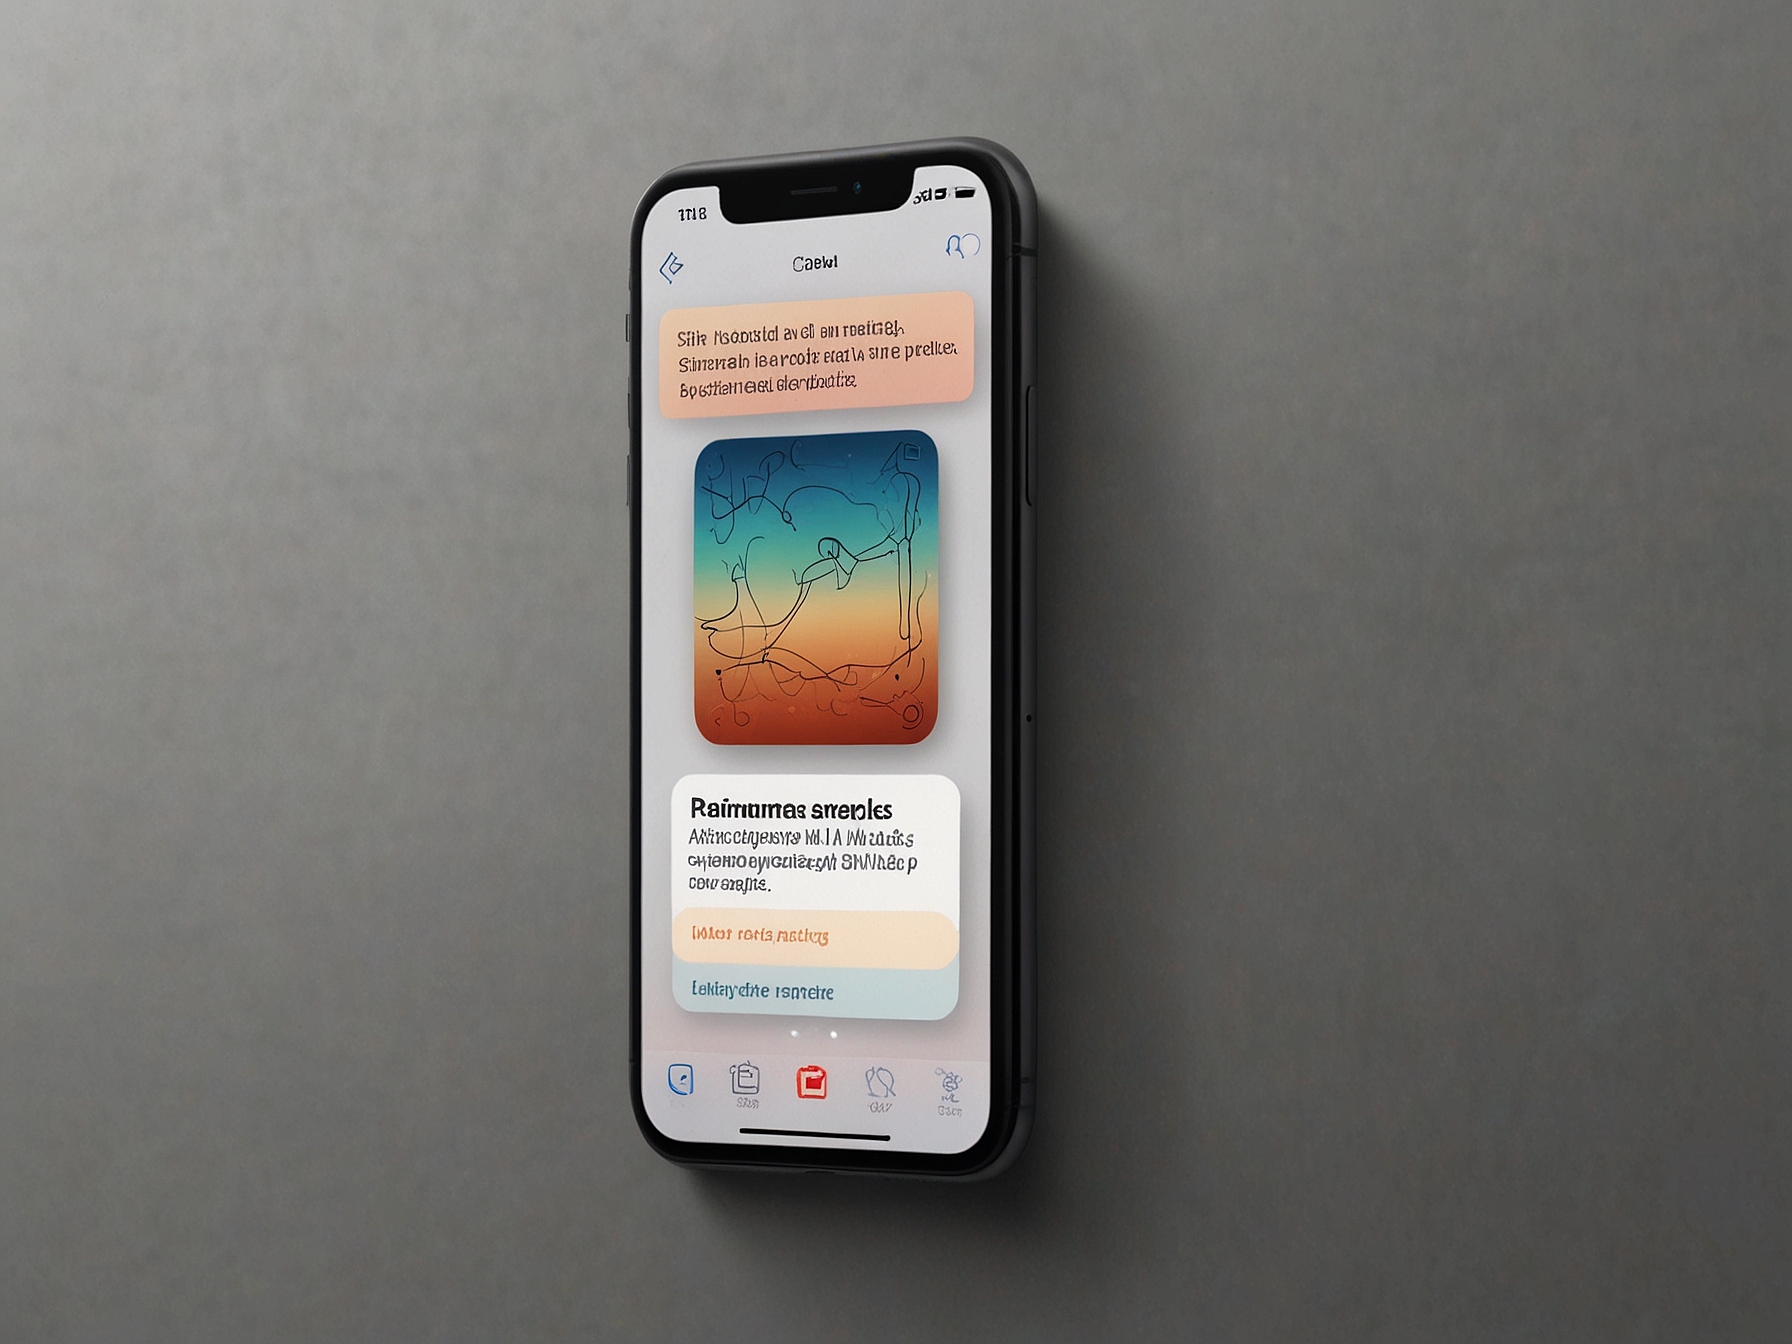 A mockup of enhanced Siri interaction on an iPhone screen, showcasing advanced, intuitive automation features that could be part of the premium Apple Intelligence+ service.